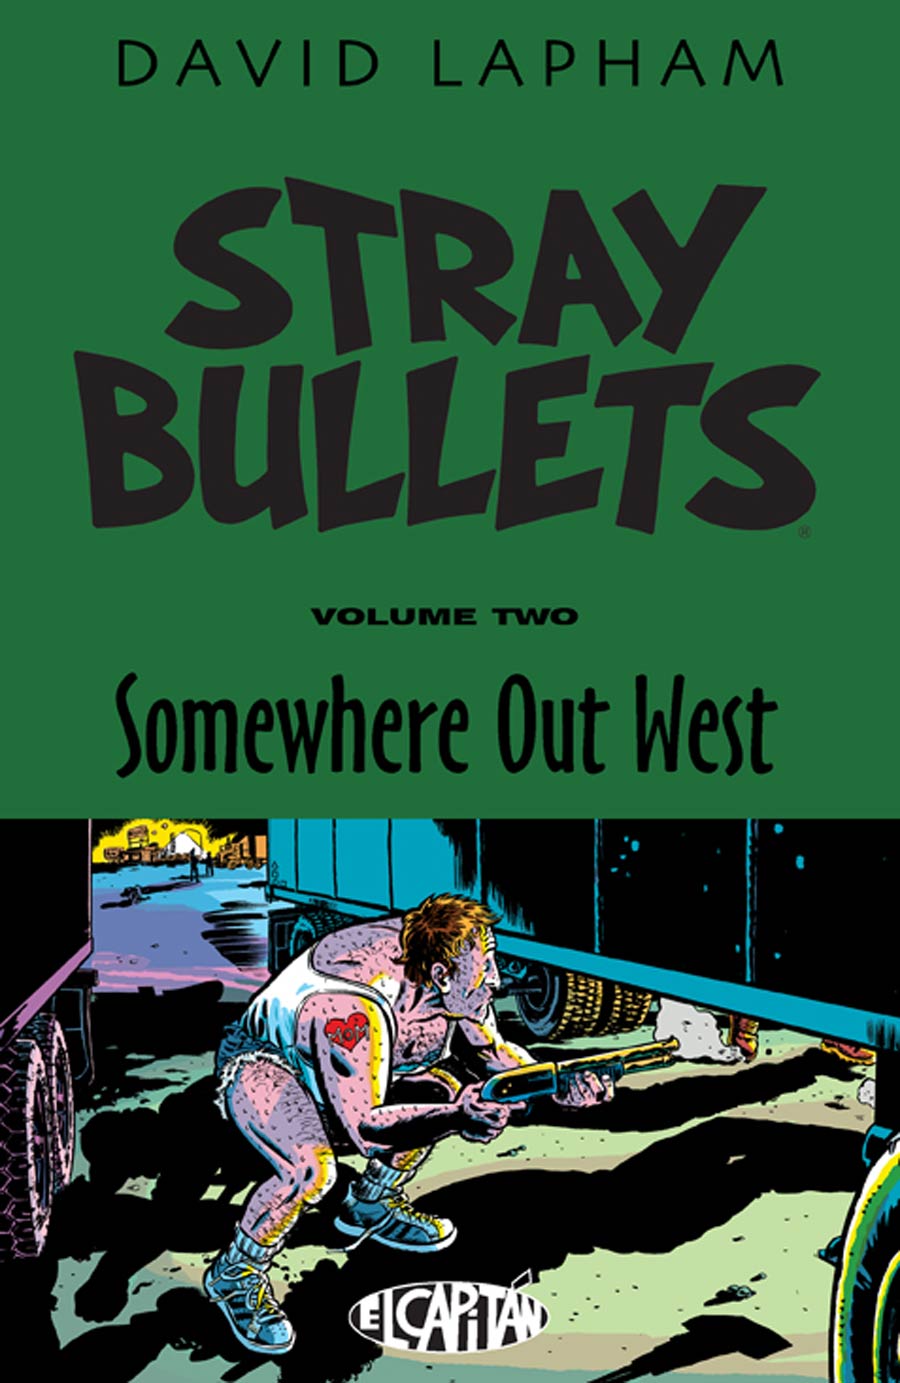 Stray Bullets Vol 2 Somewhere Out West TP Image Edition